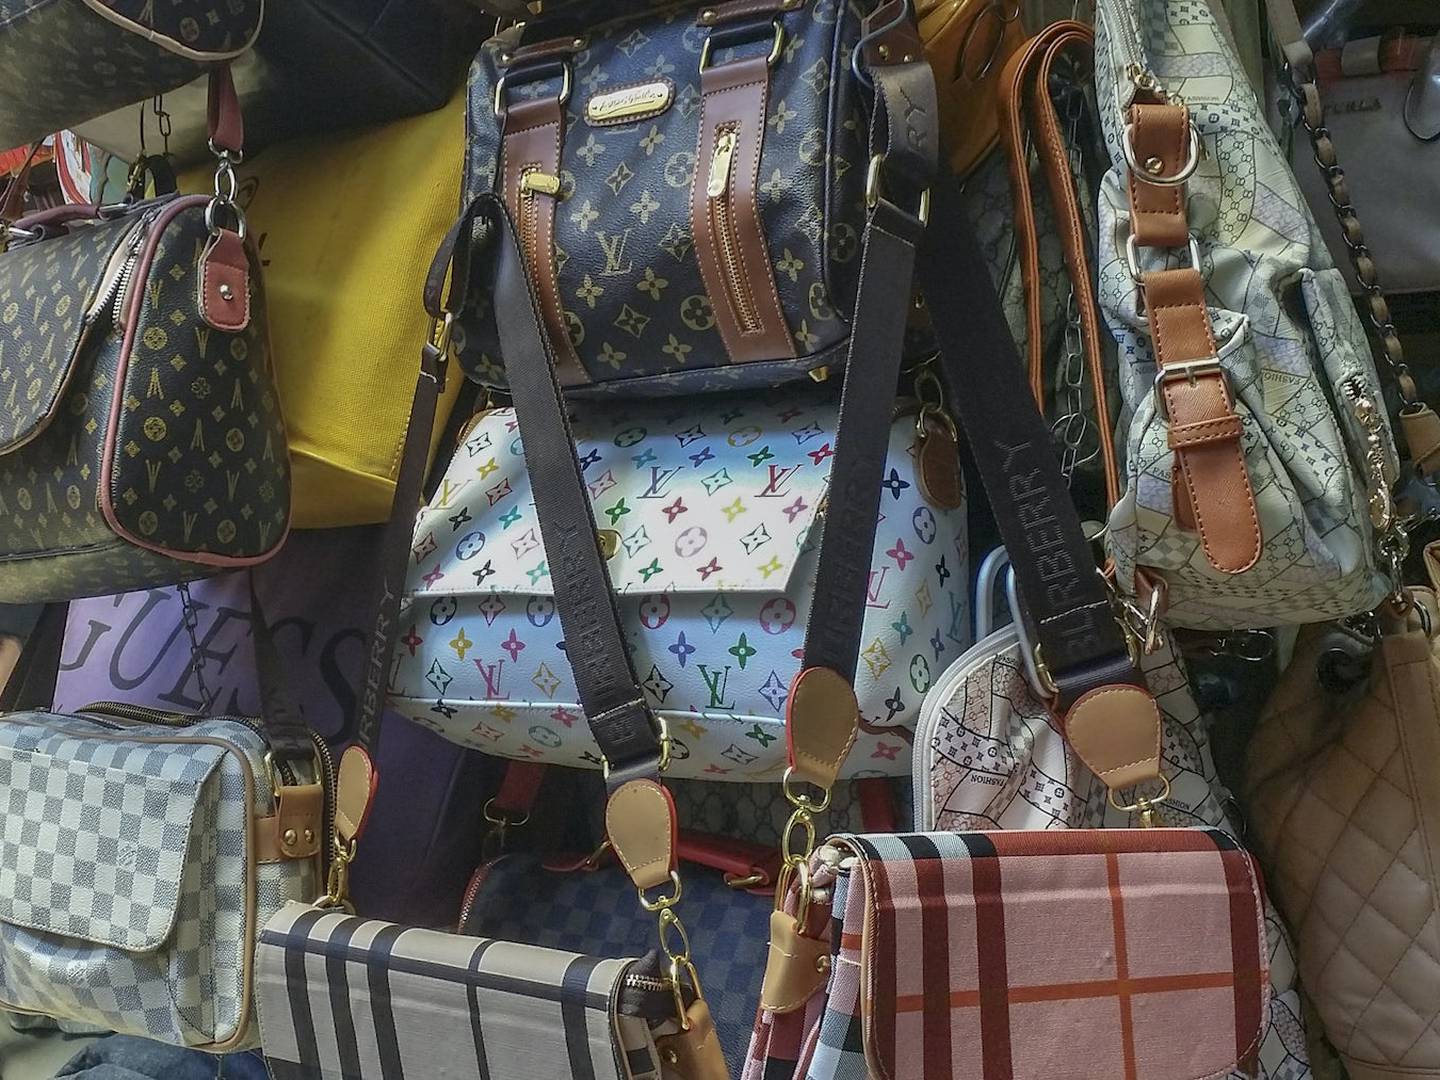 Gets Hands-On in Fighting Fake Handbags With New Service